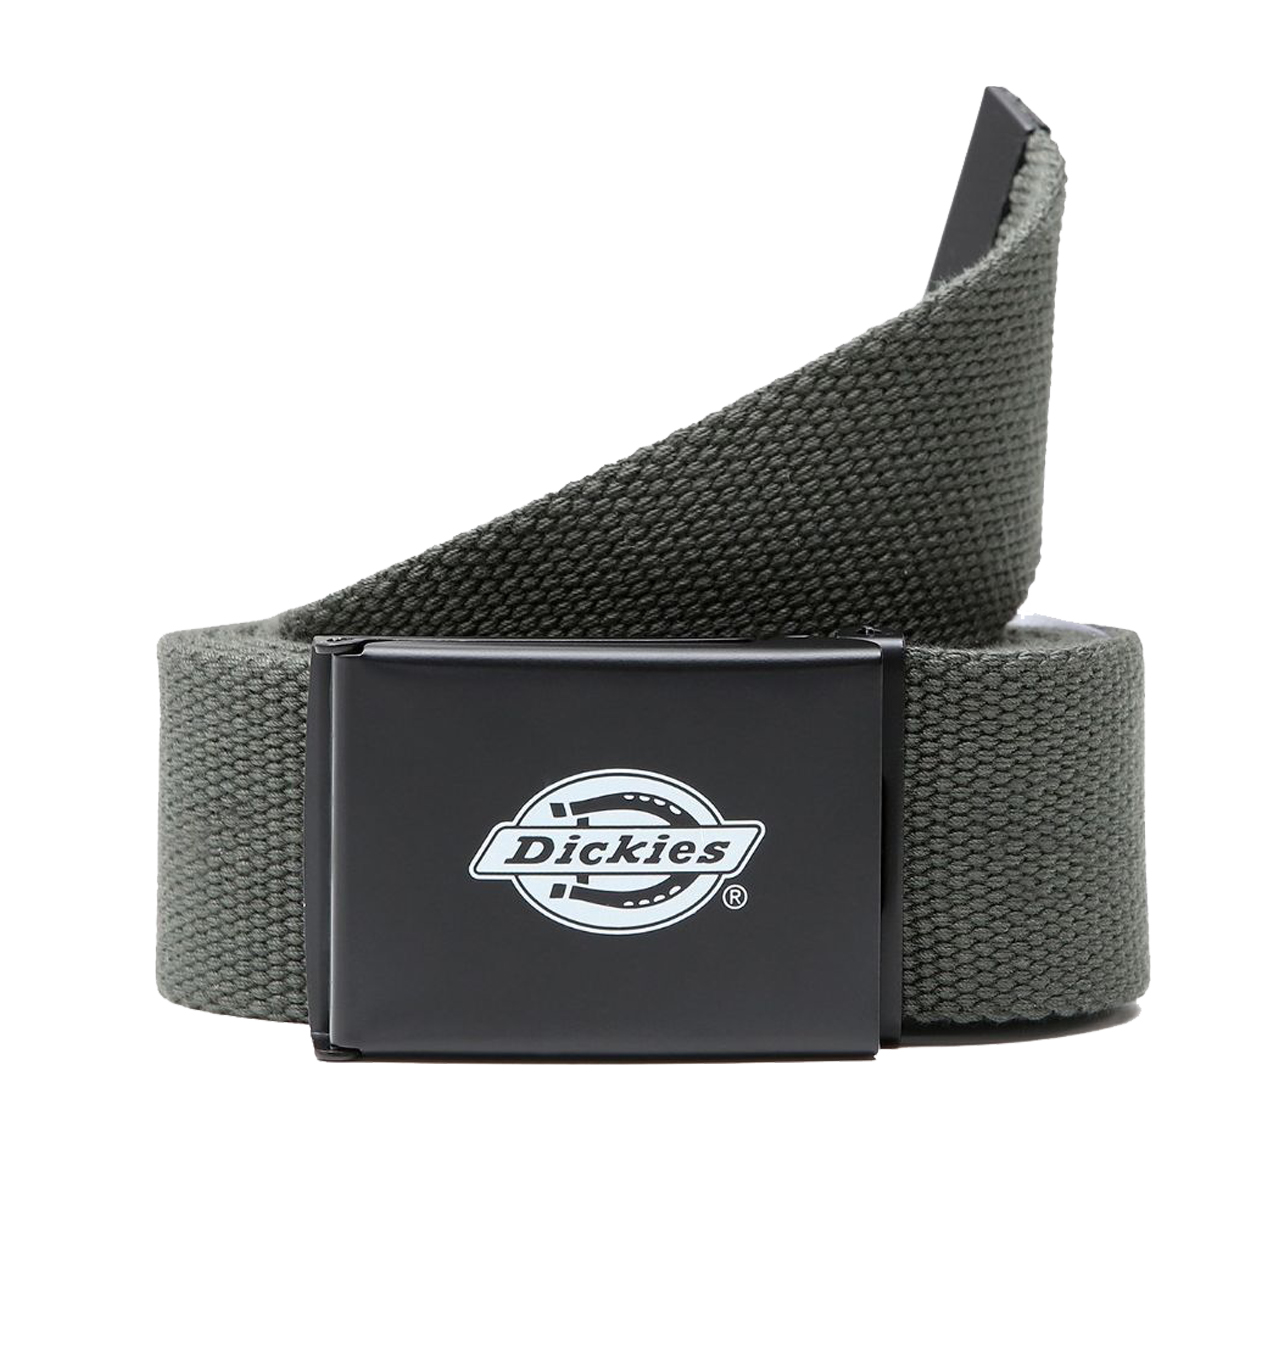 Dickies - Orcutt Belt - Olive Green